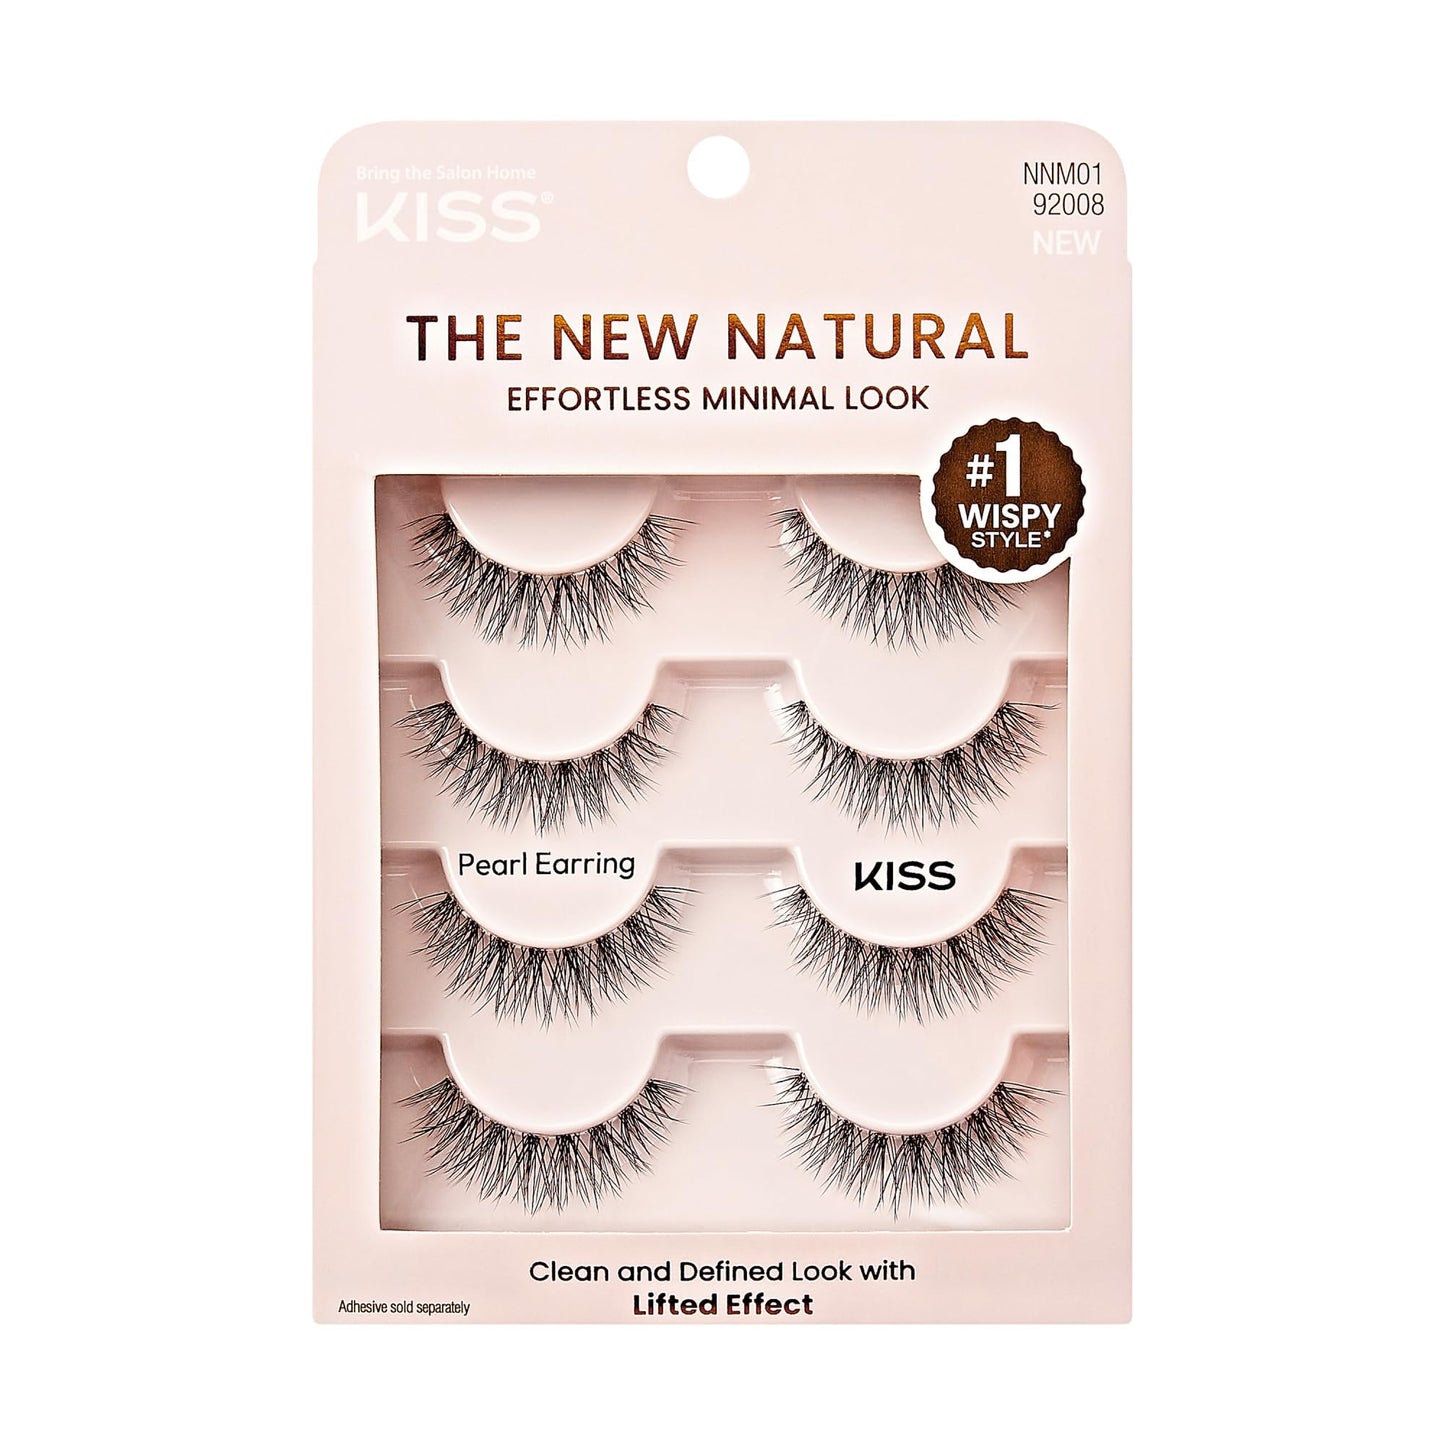 KISS The New Natural, False Eyelashes, Pearl Earring', 12 mm, Includes 4 Pairs Of Lashes, Contact Lens Friendly, Easy to Apply, Reusable Strip Lashes